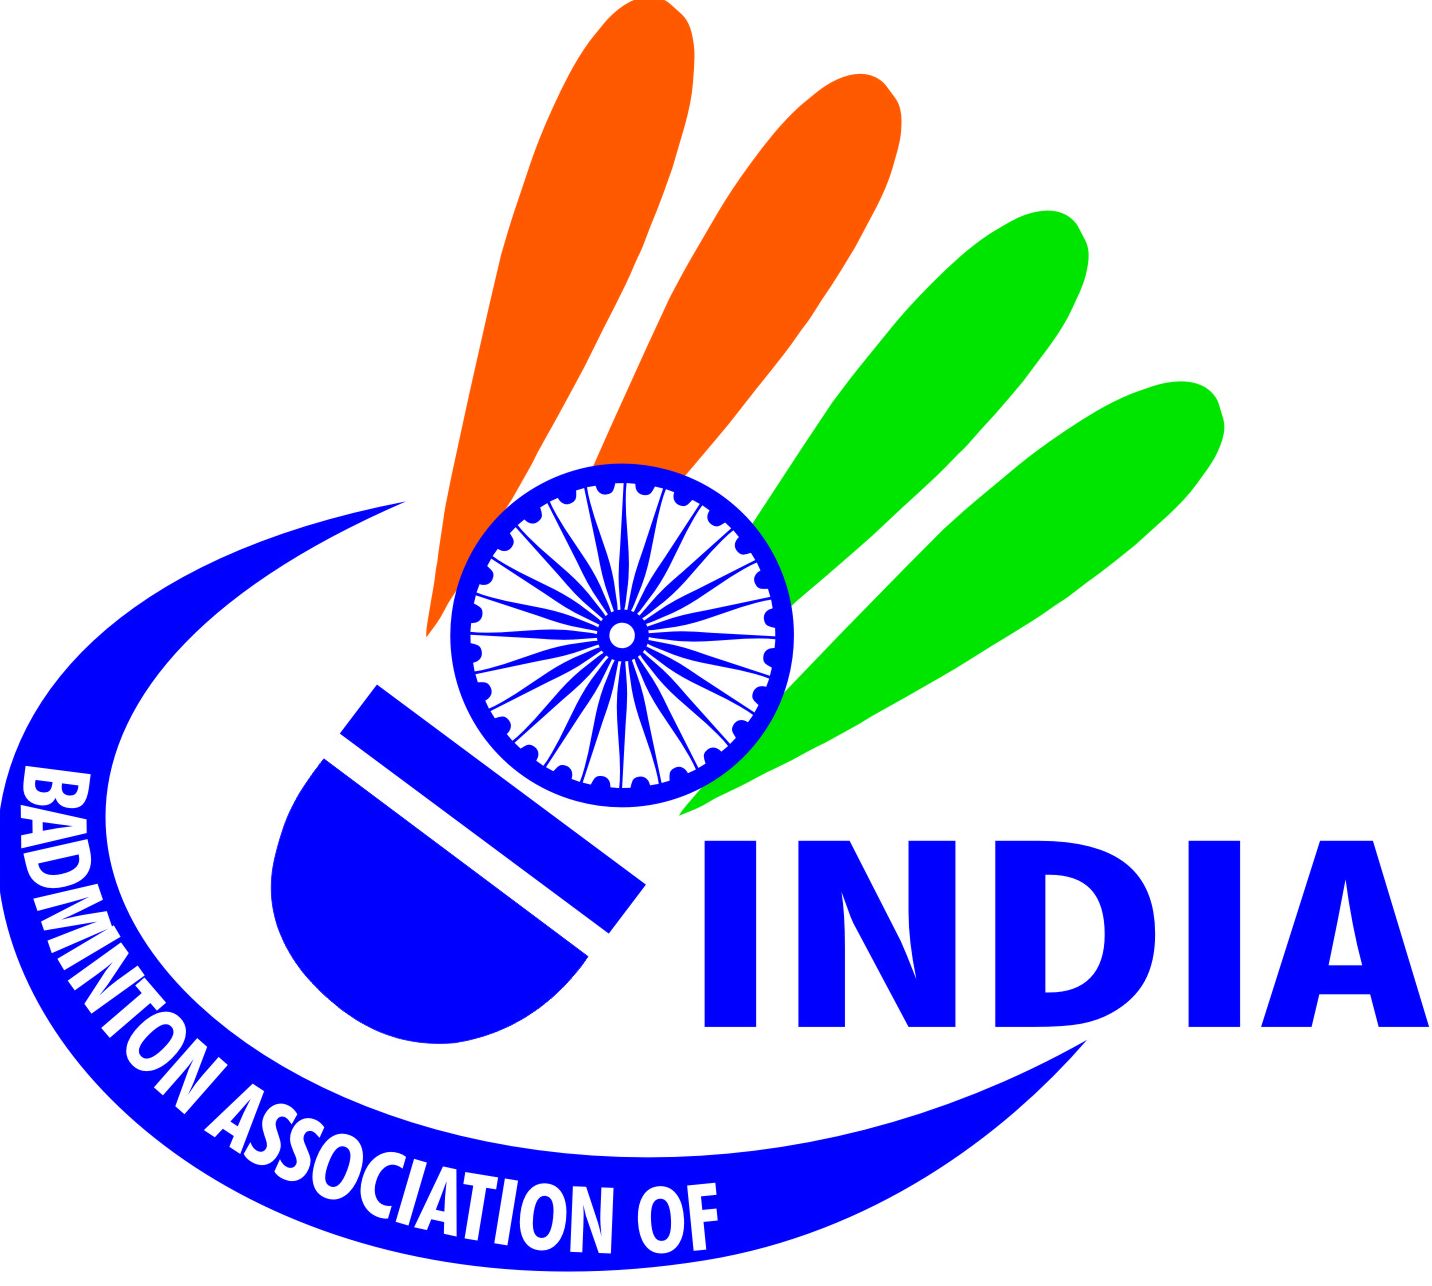 Either the Badminton Association of India (BAI) is 